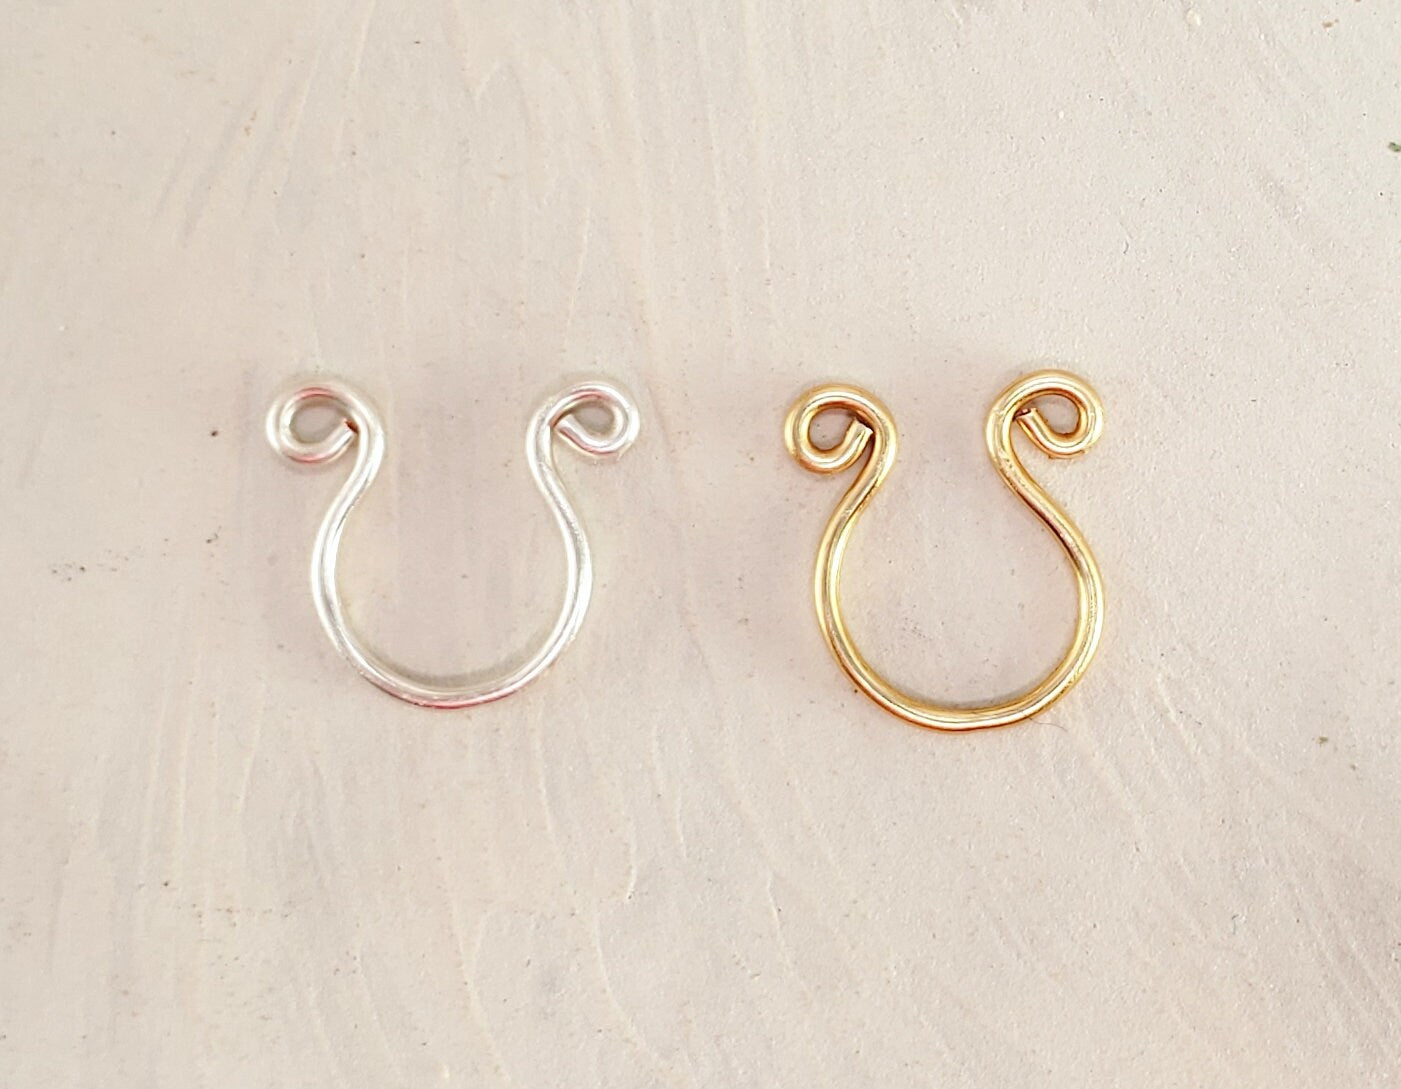 Nose Ring Cuff FAKE Faux No Piercing, 925 Sterling Silver or 14K/20 Gold Filled, Adjustable, Body Jewelry, Gift Woman Man Unisex, Boho